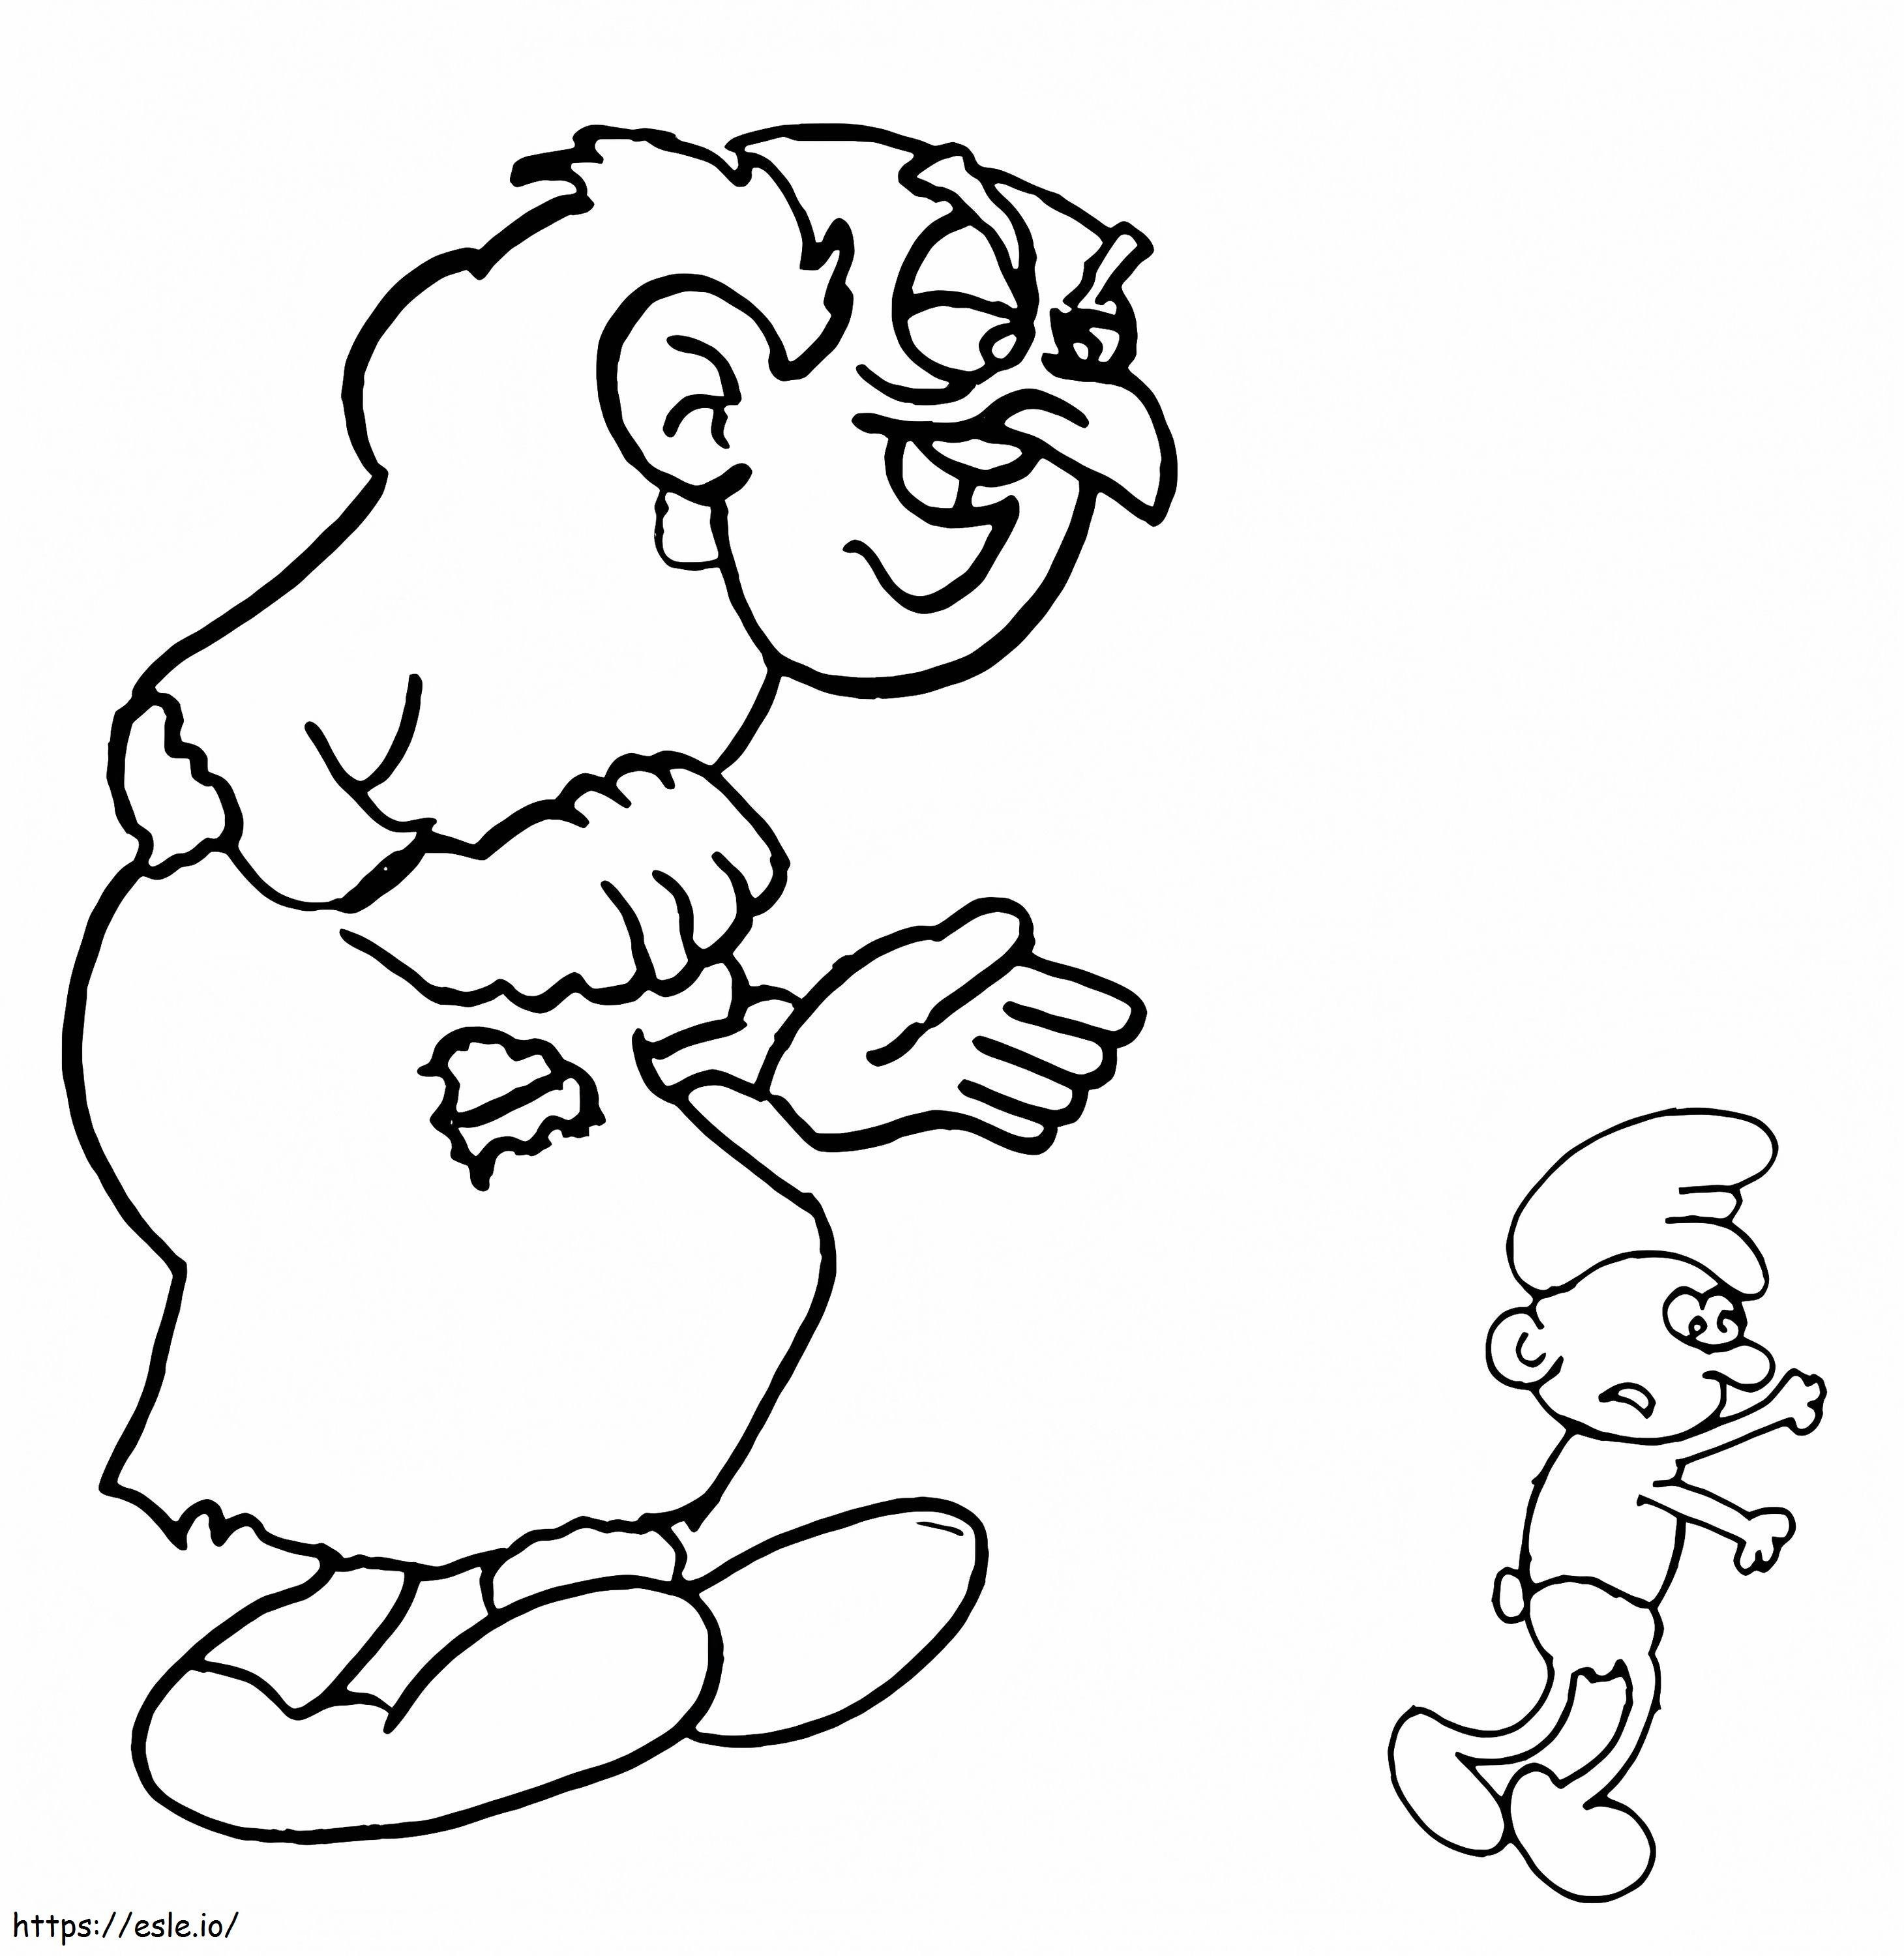 Gargamel And Smurf coloring page